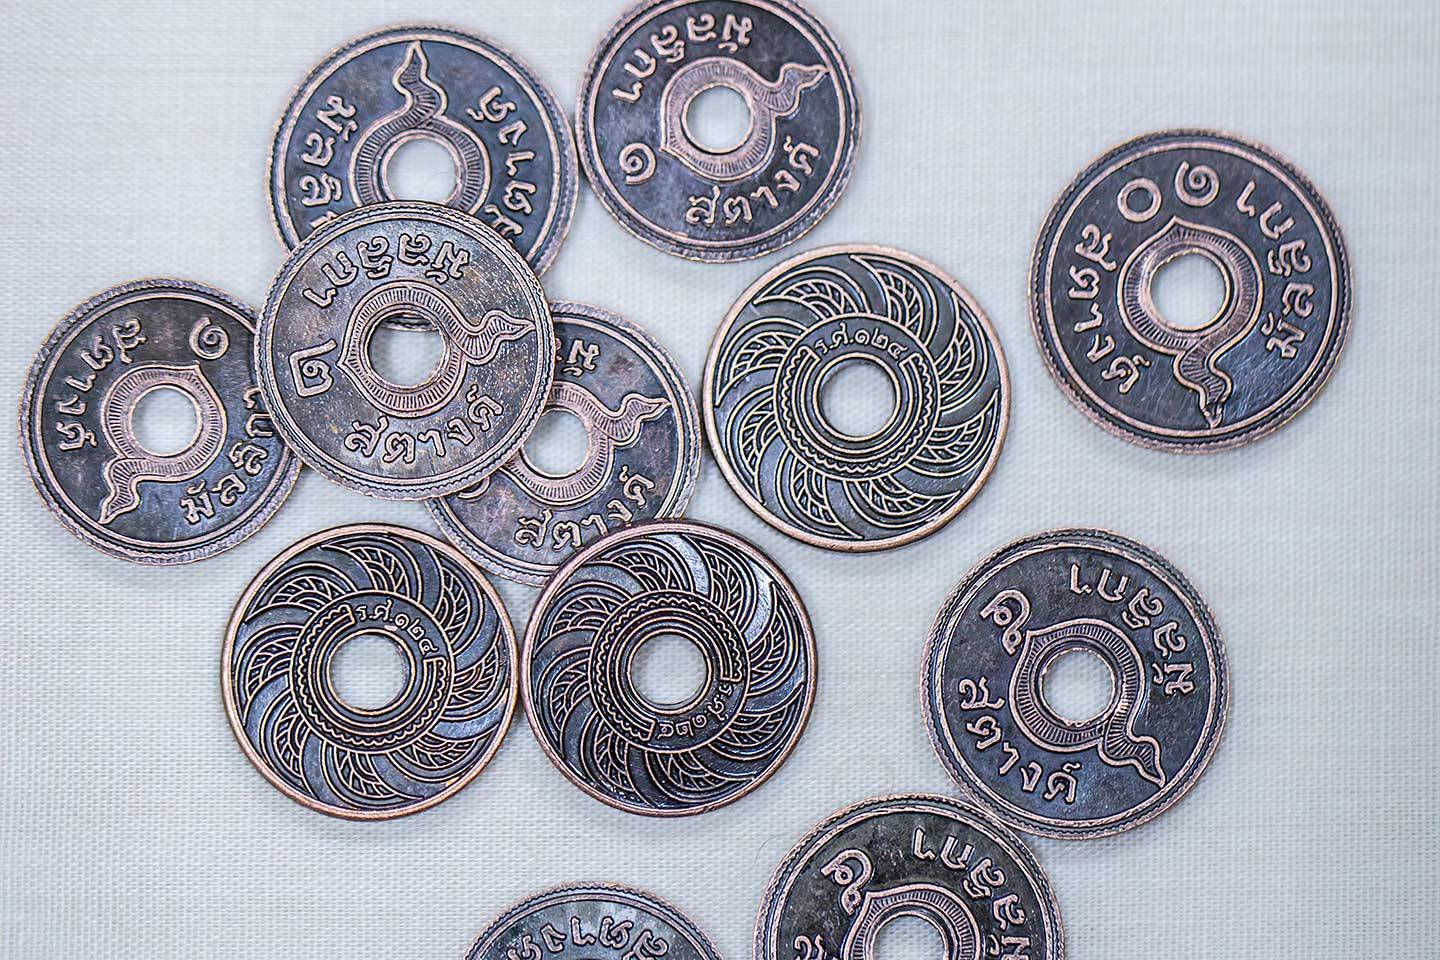 Holed Coins 